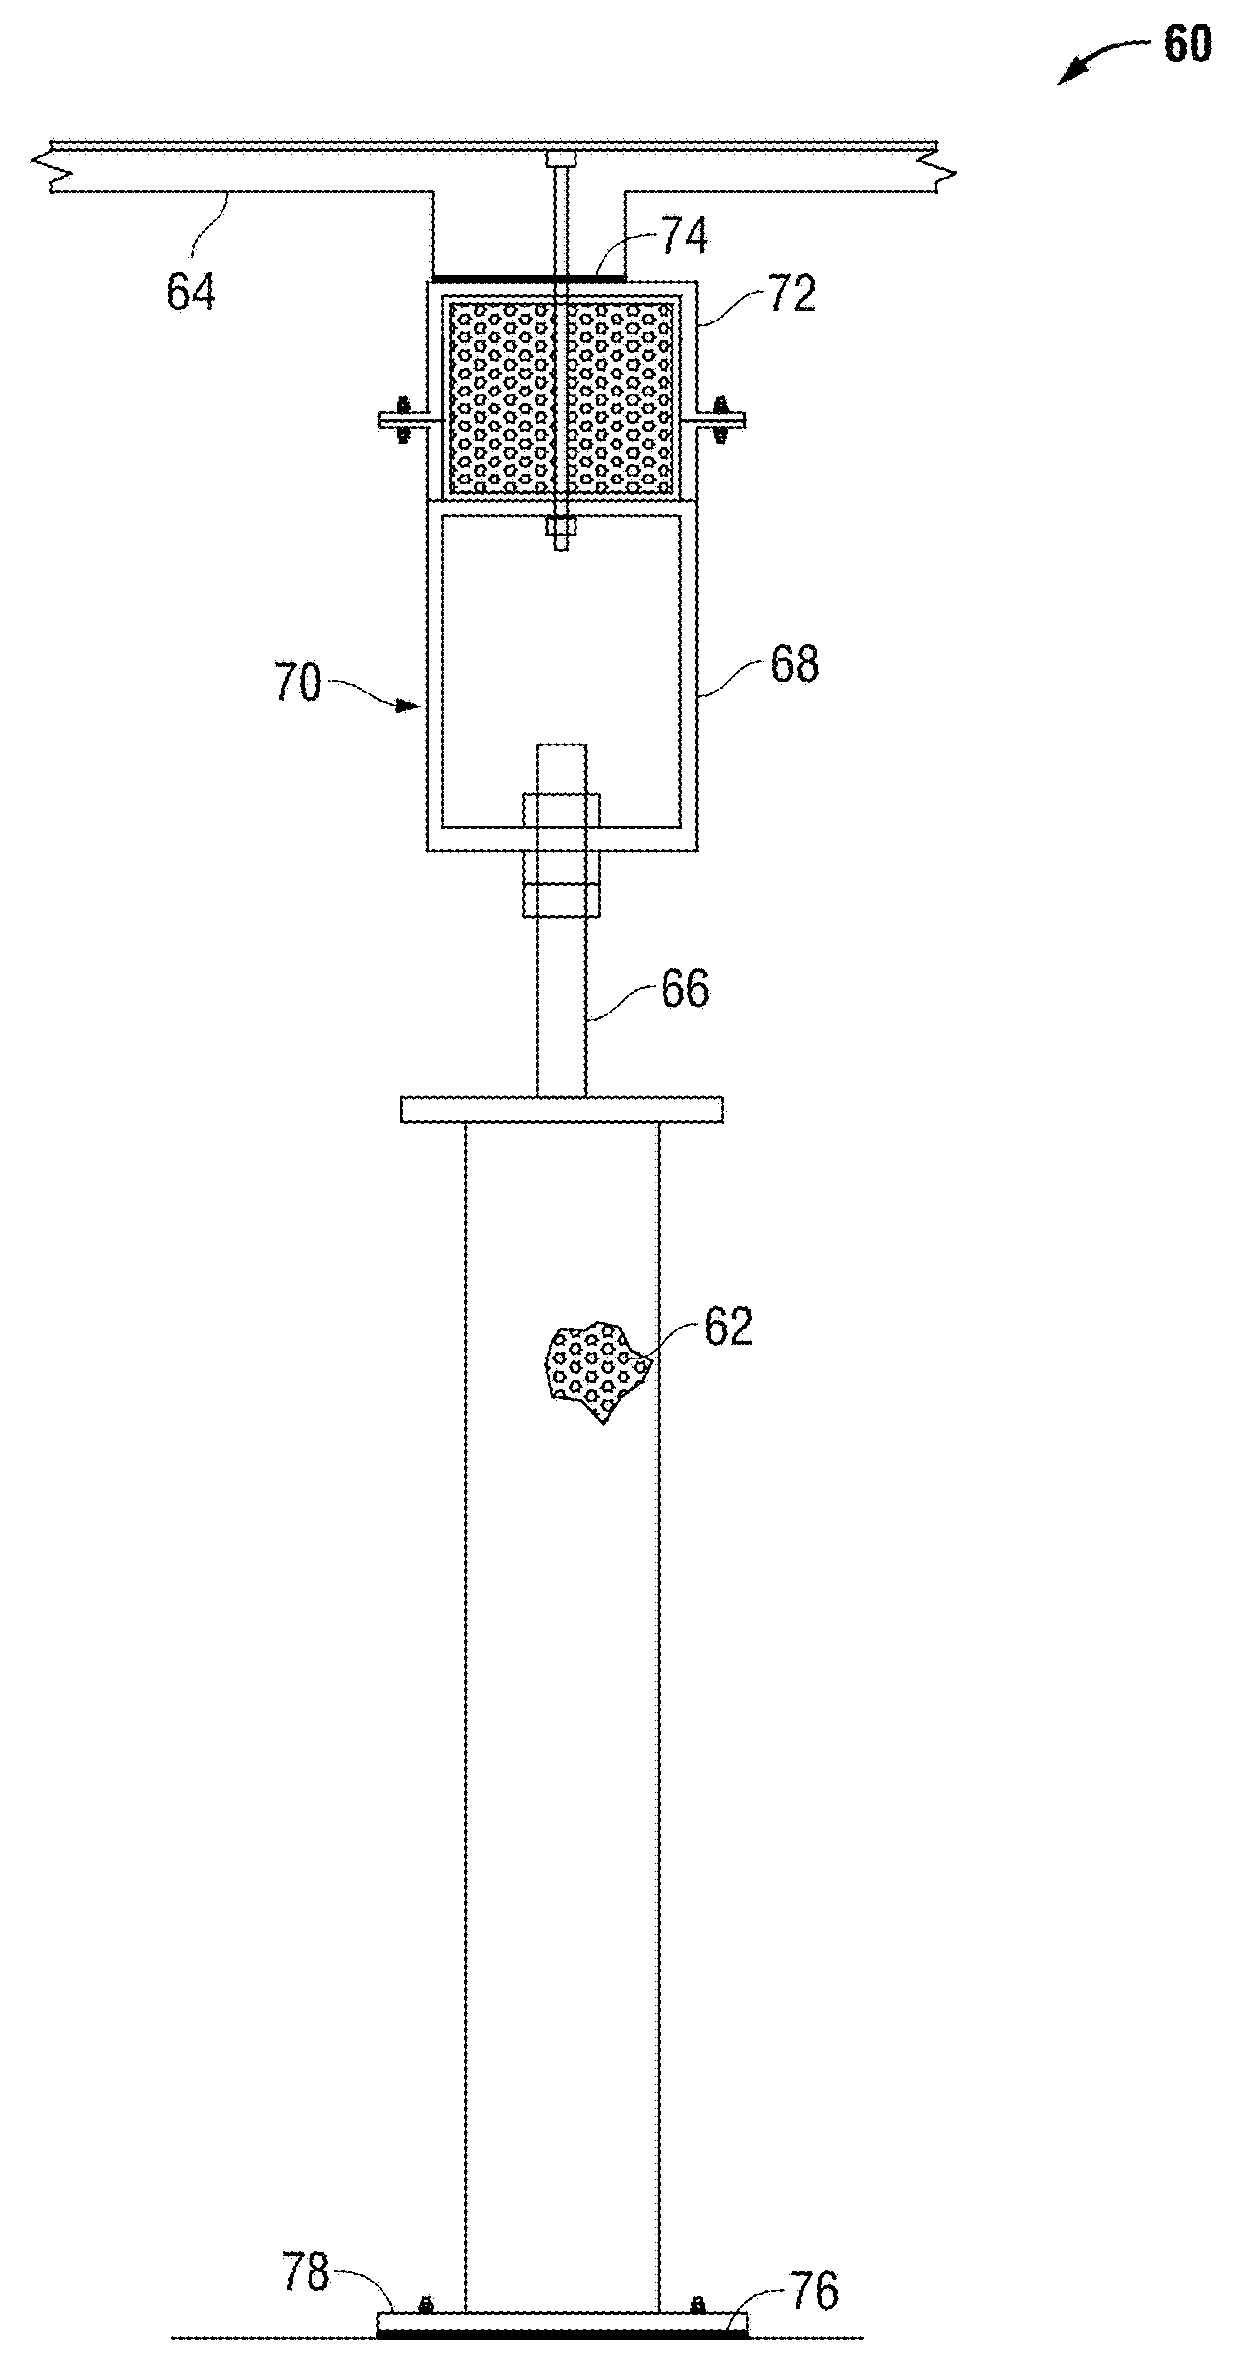 Method and system for improved semiconductor processing equipment vibration isolation and reduction